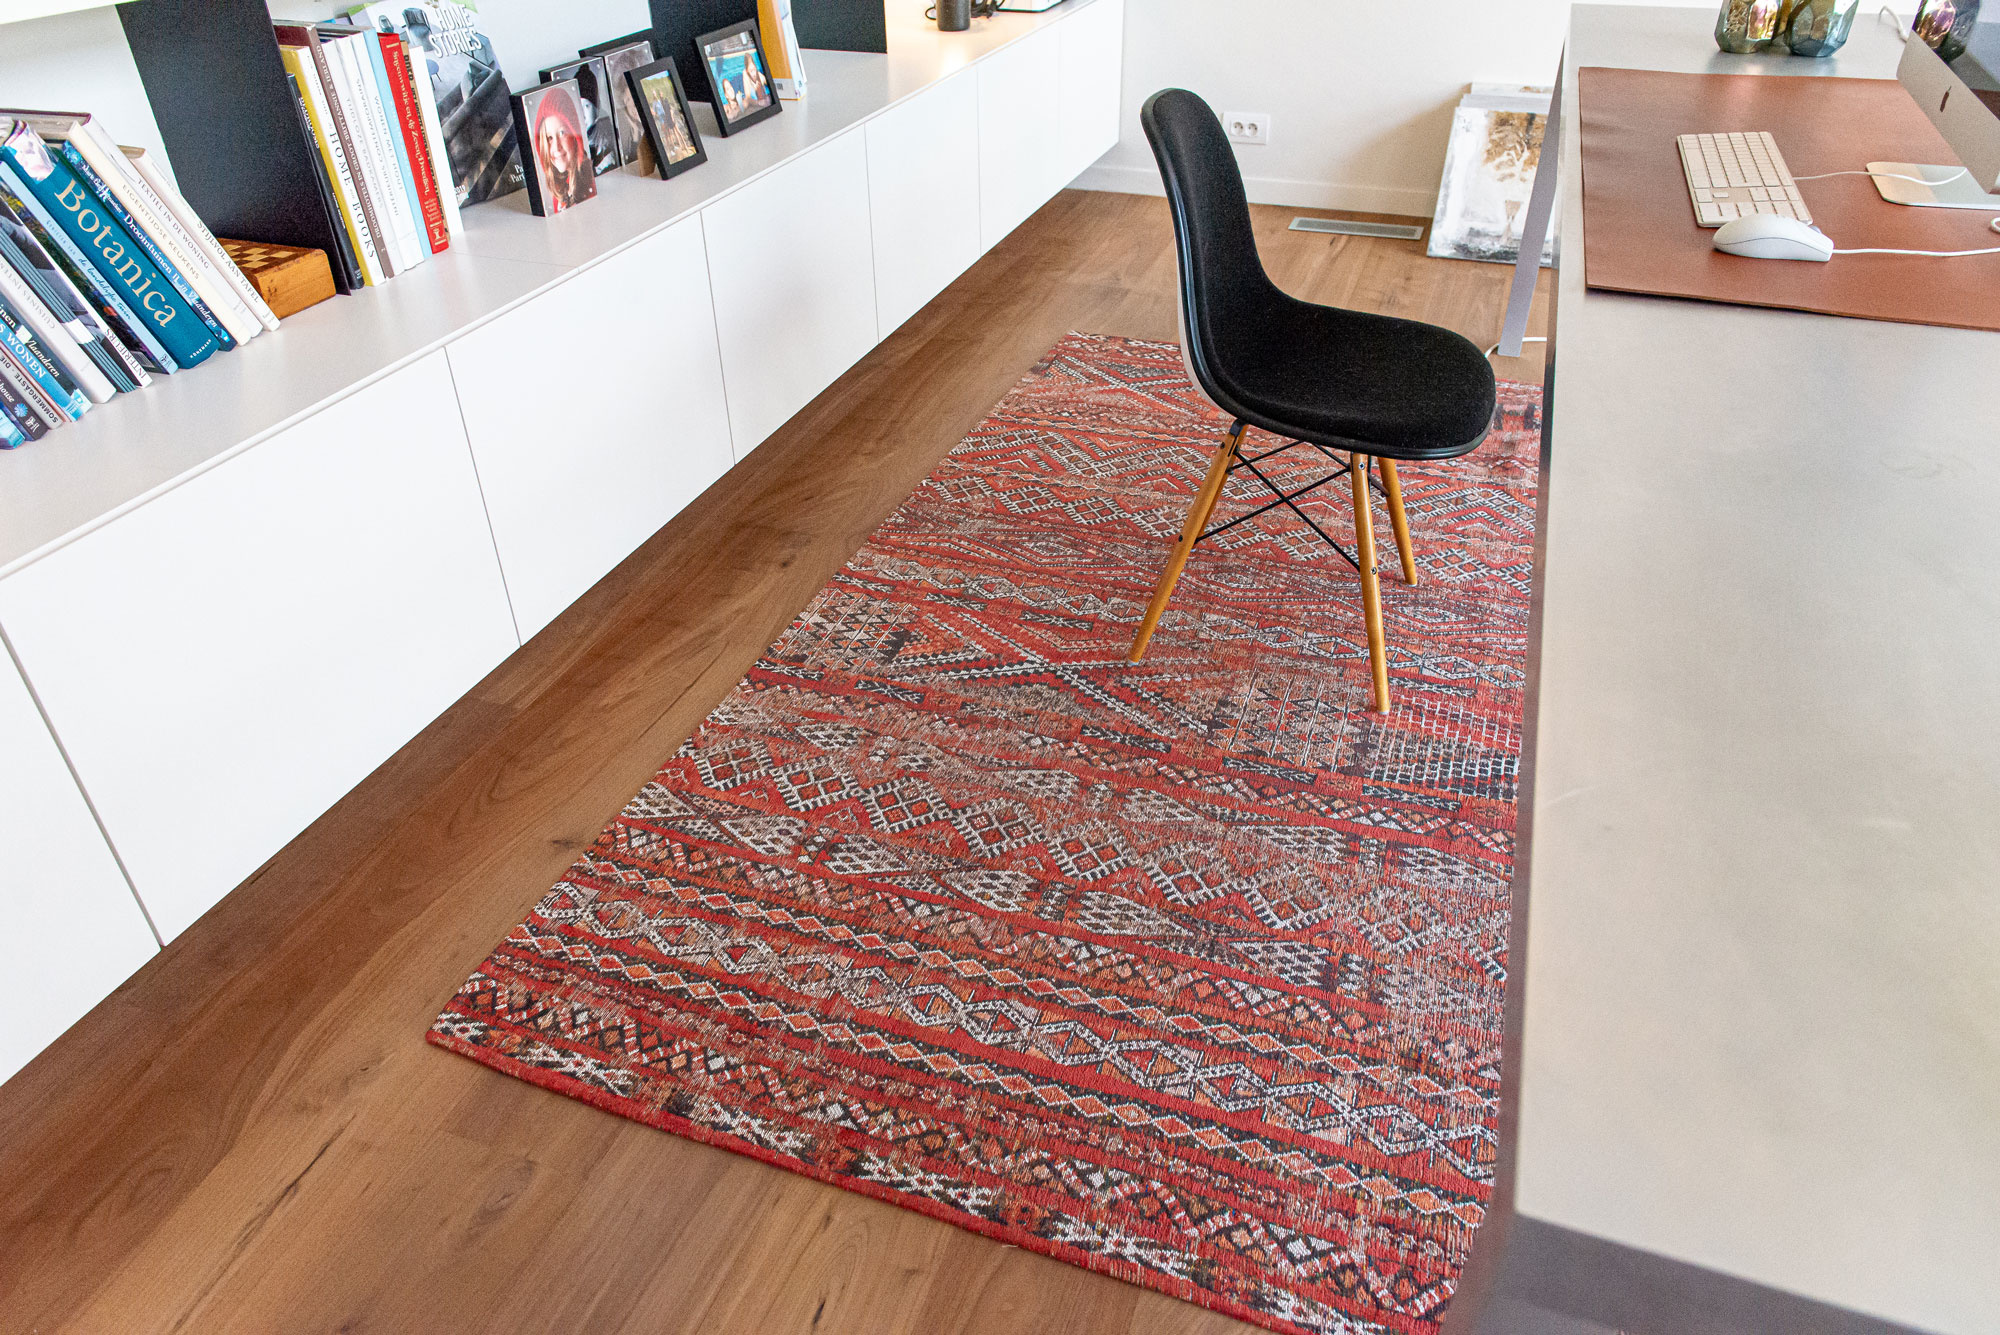 Fez Red 9115 Rug ☞ Size: 170 x 240 cm